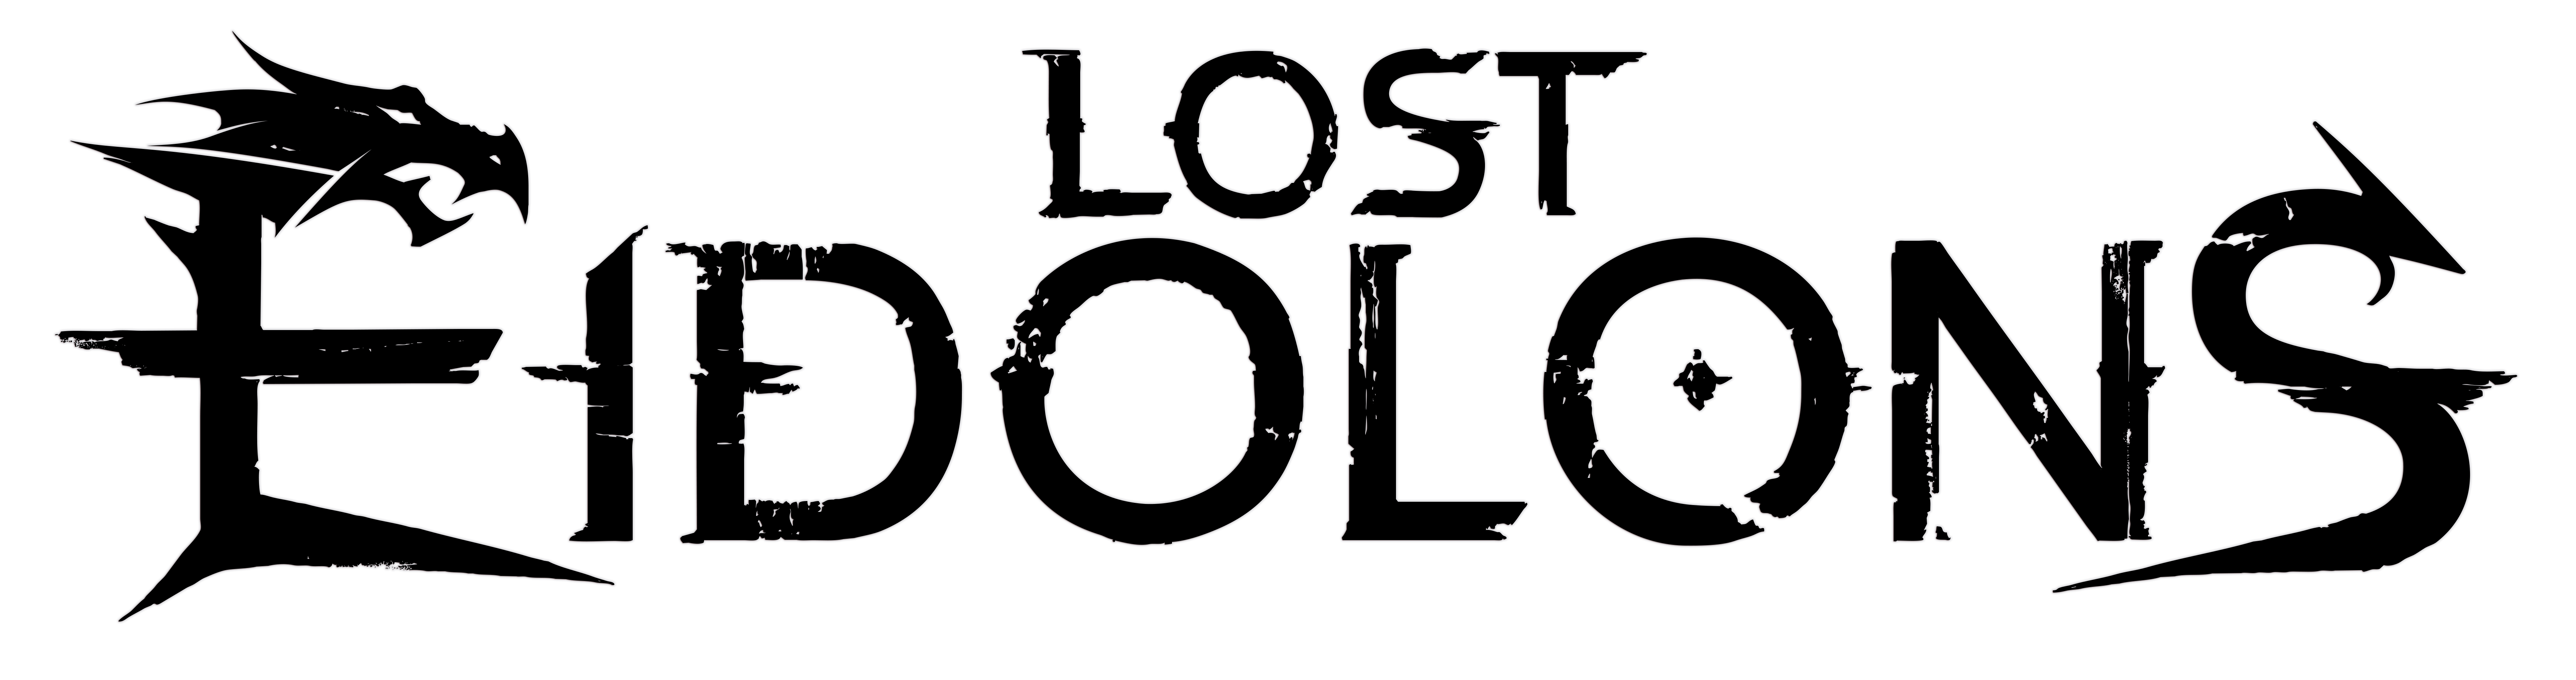 Lost Eidolons download the last version for windows